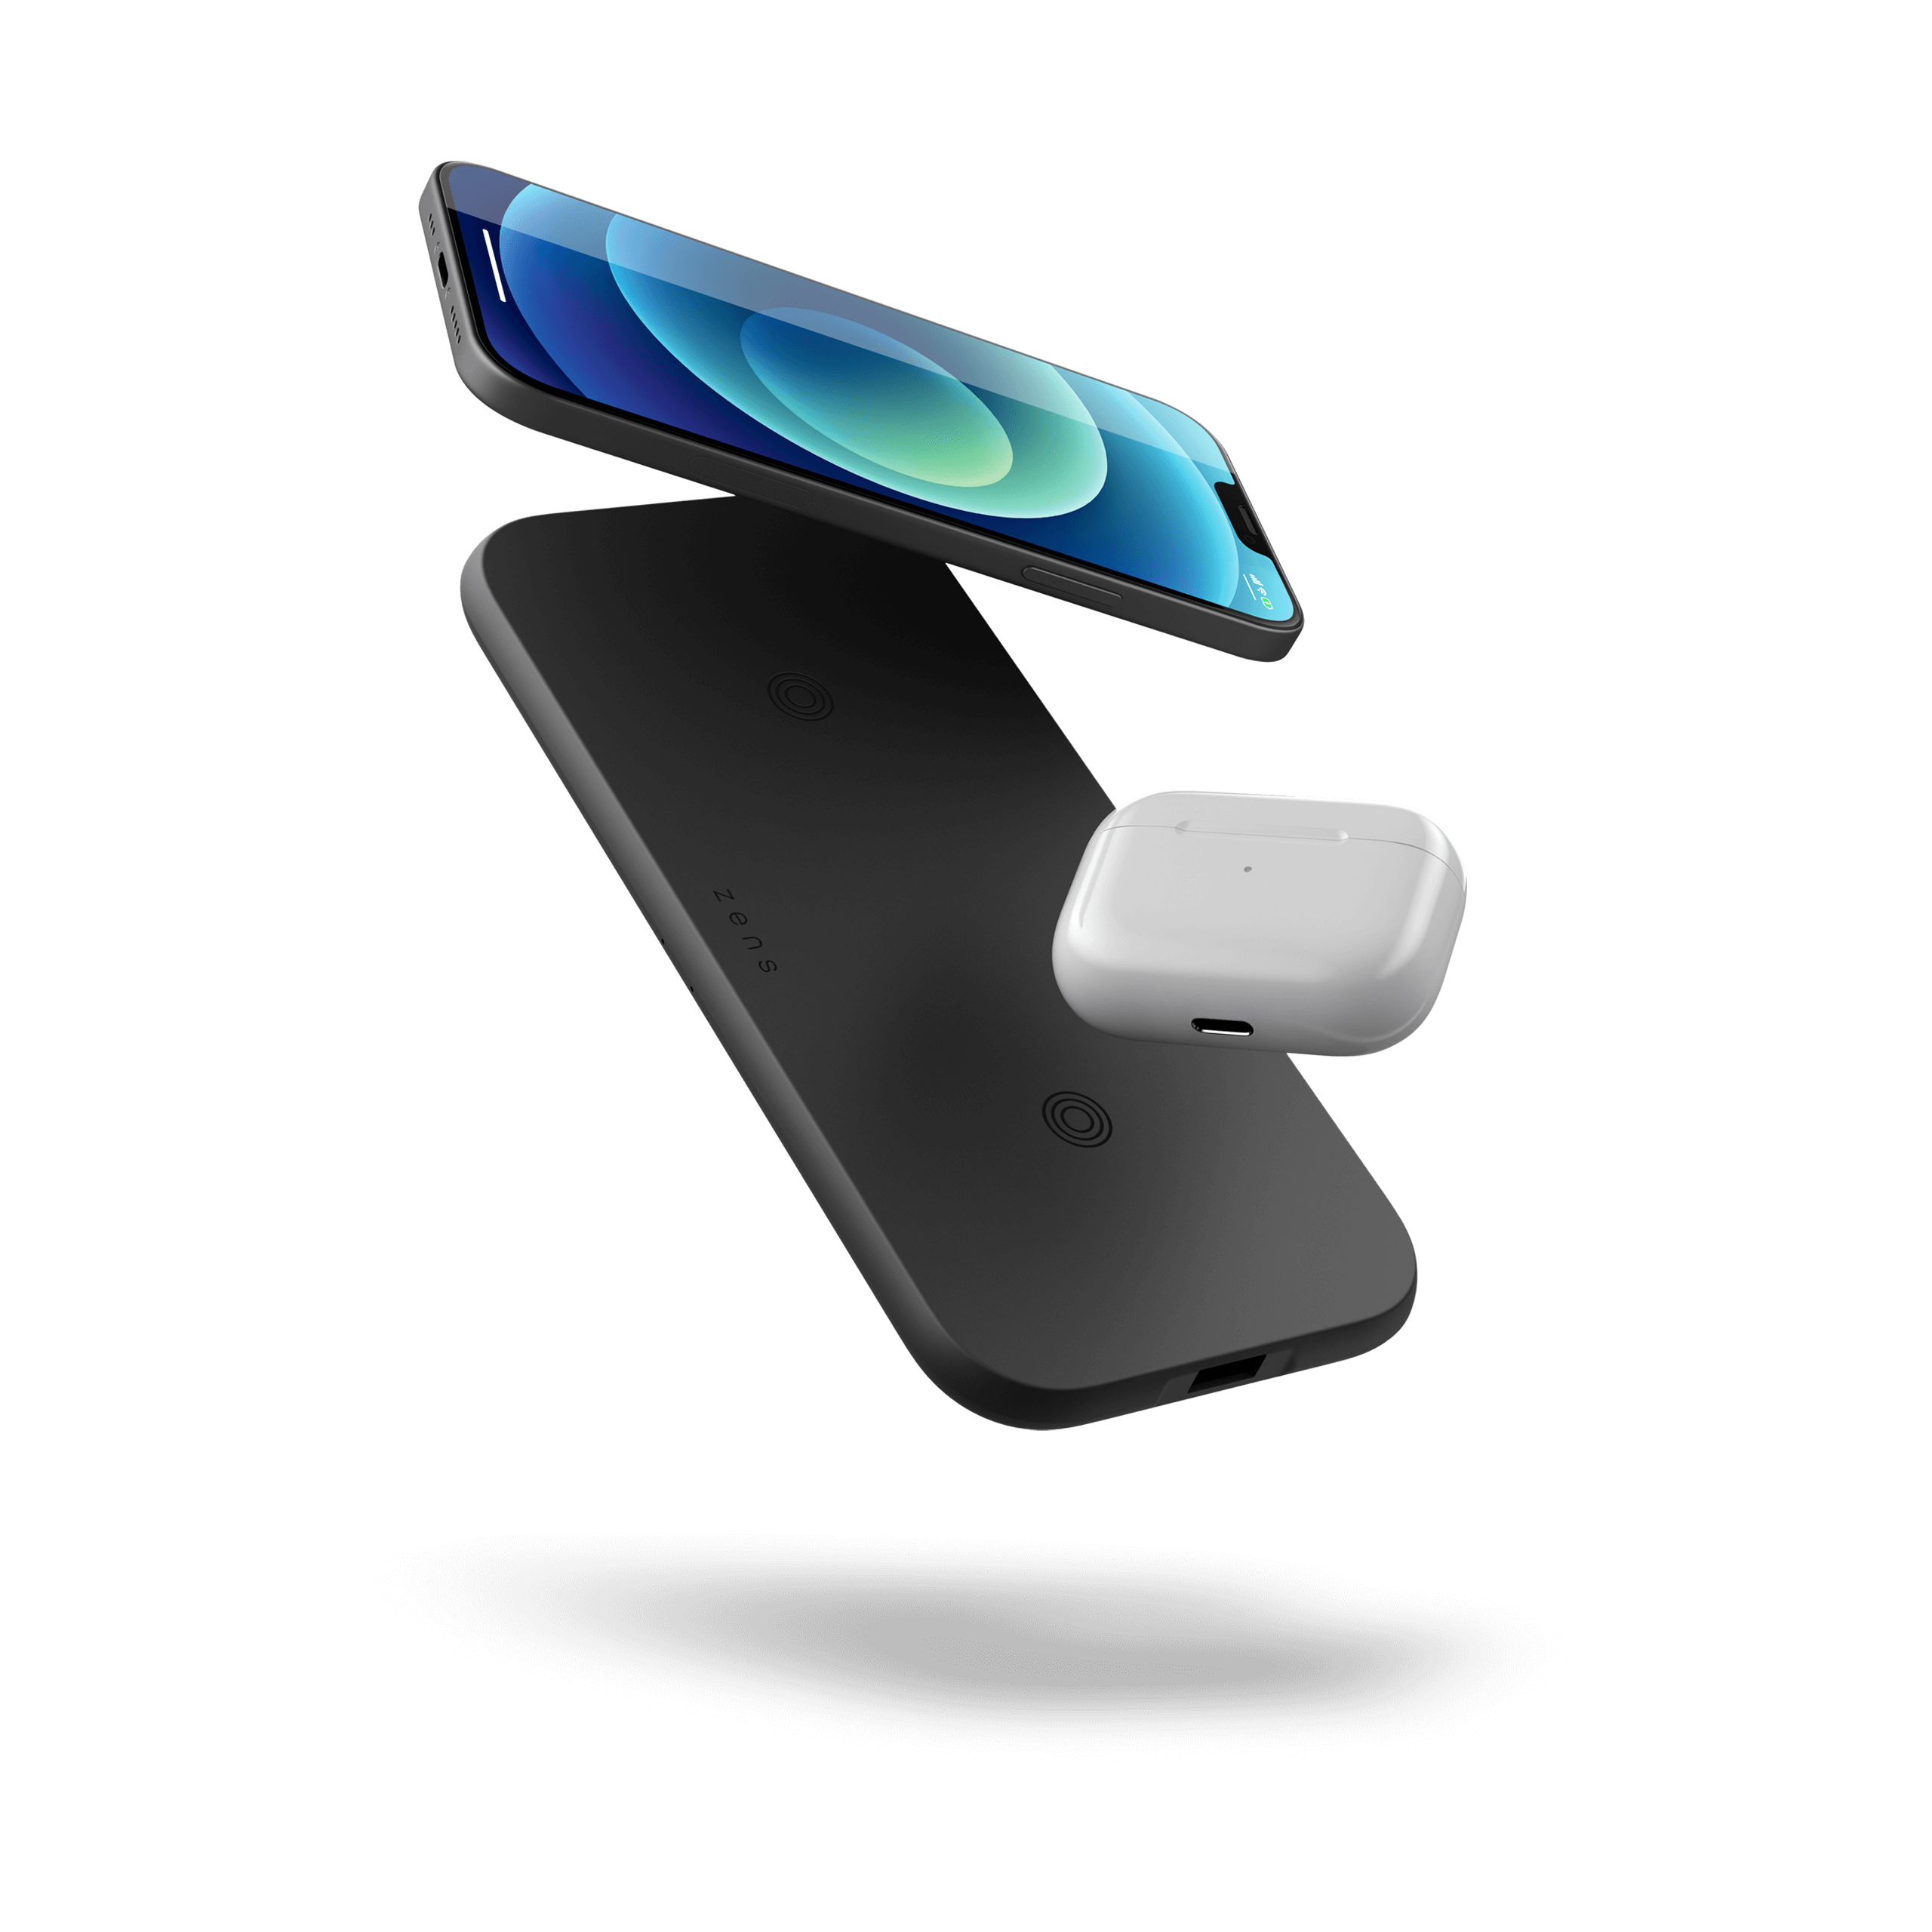 ZEDC12B - Zens Dual Wireless Charger with devices